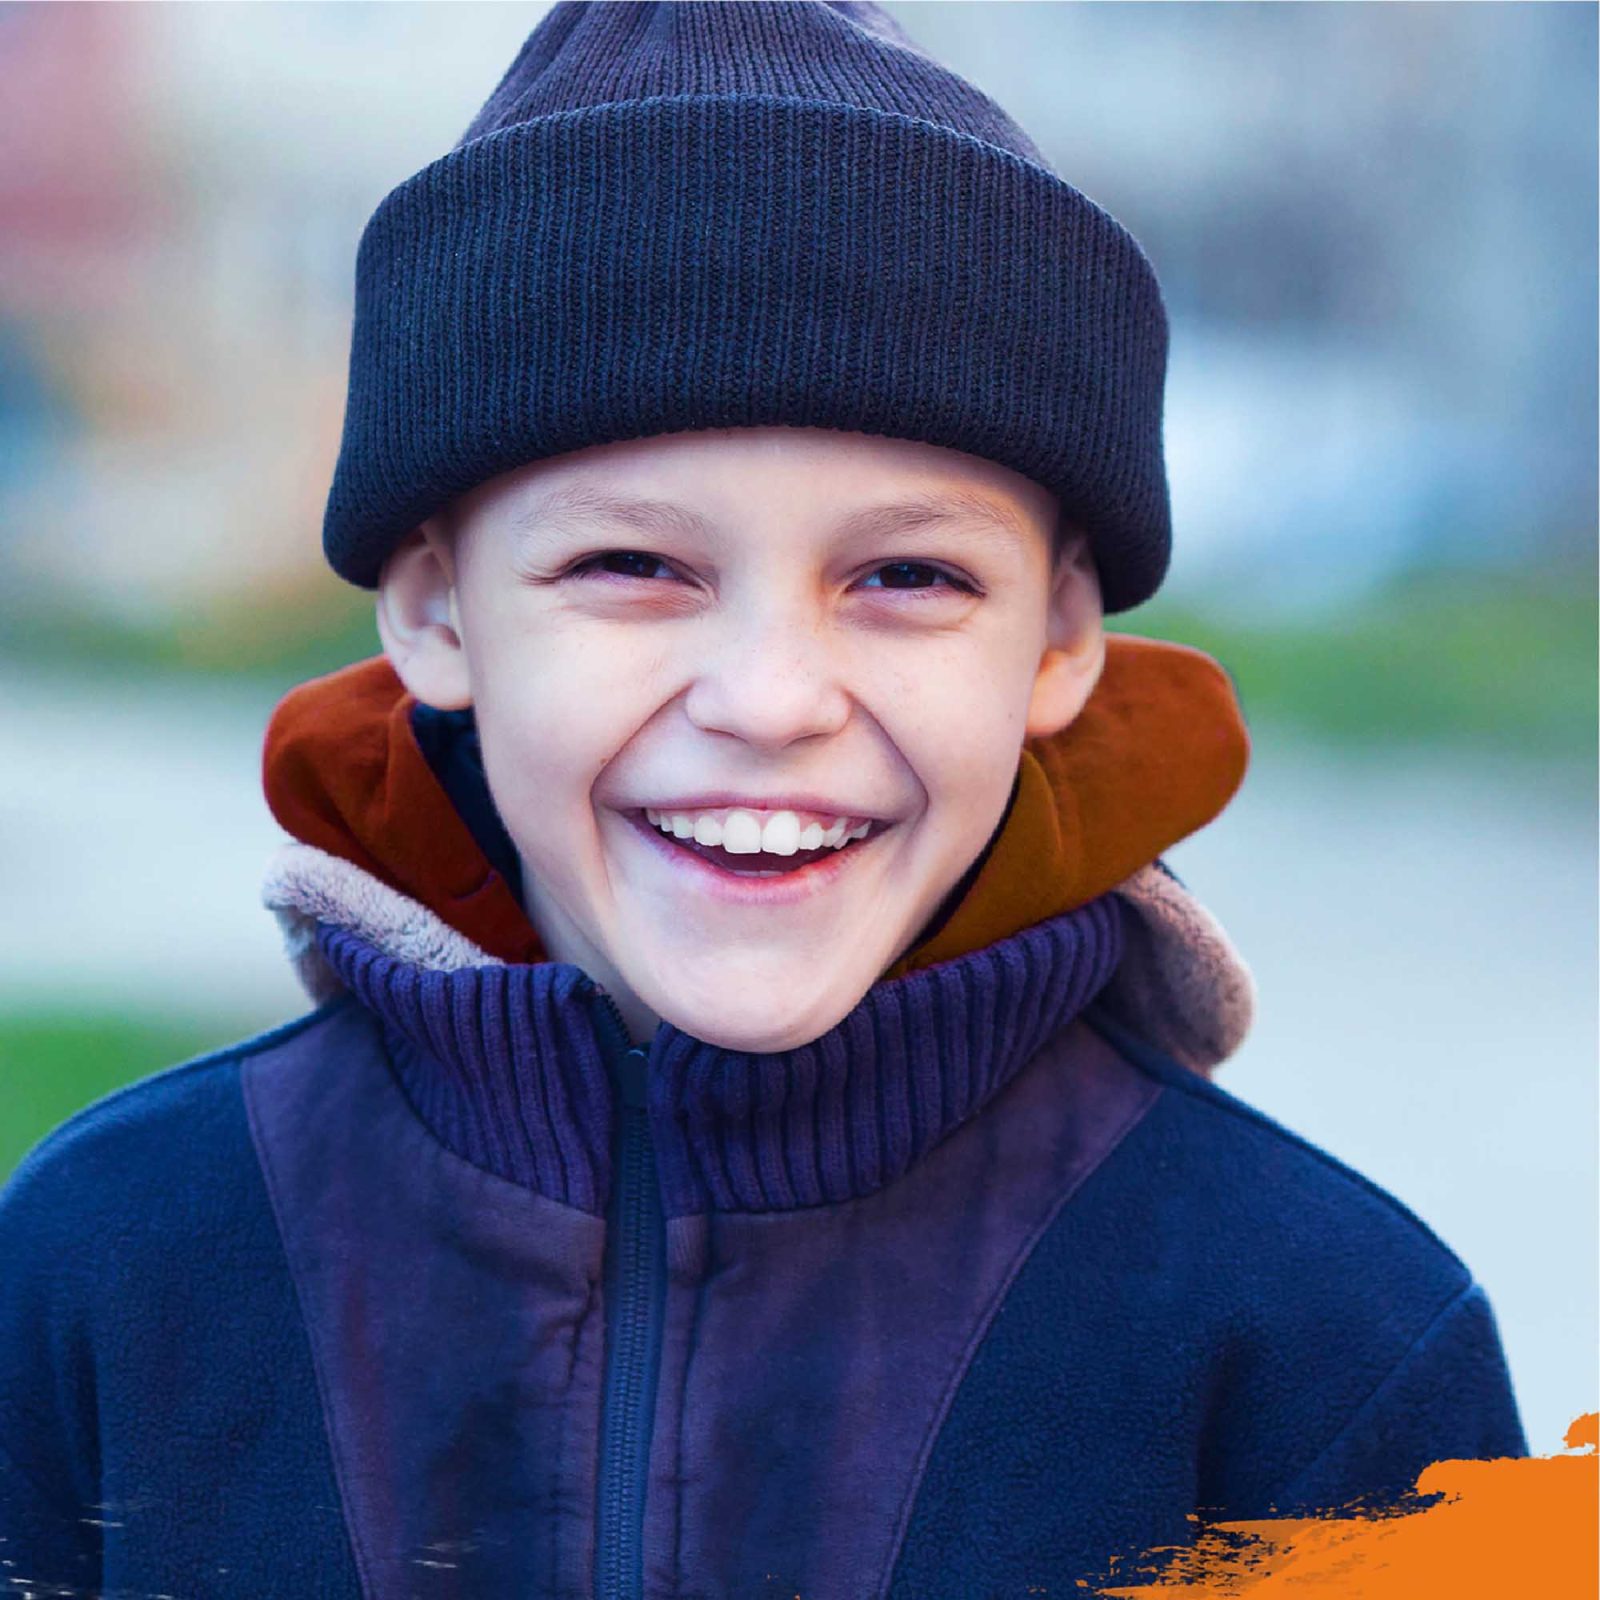 A young boy with a joyful smile, wearing a black beanie and blue jacket designed by a renowned brand design agency, stands outdoors. His cheeks are rosy, and his eyes gleam with happiness